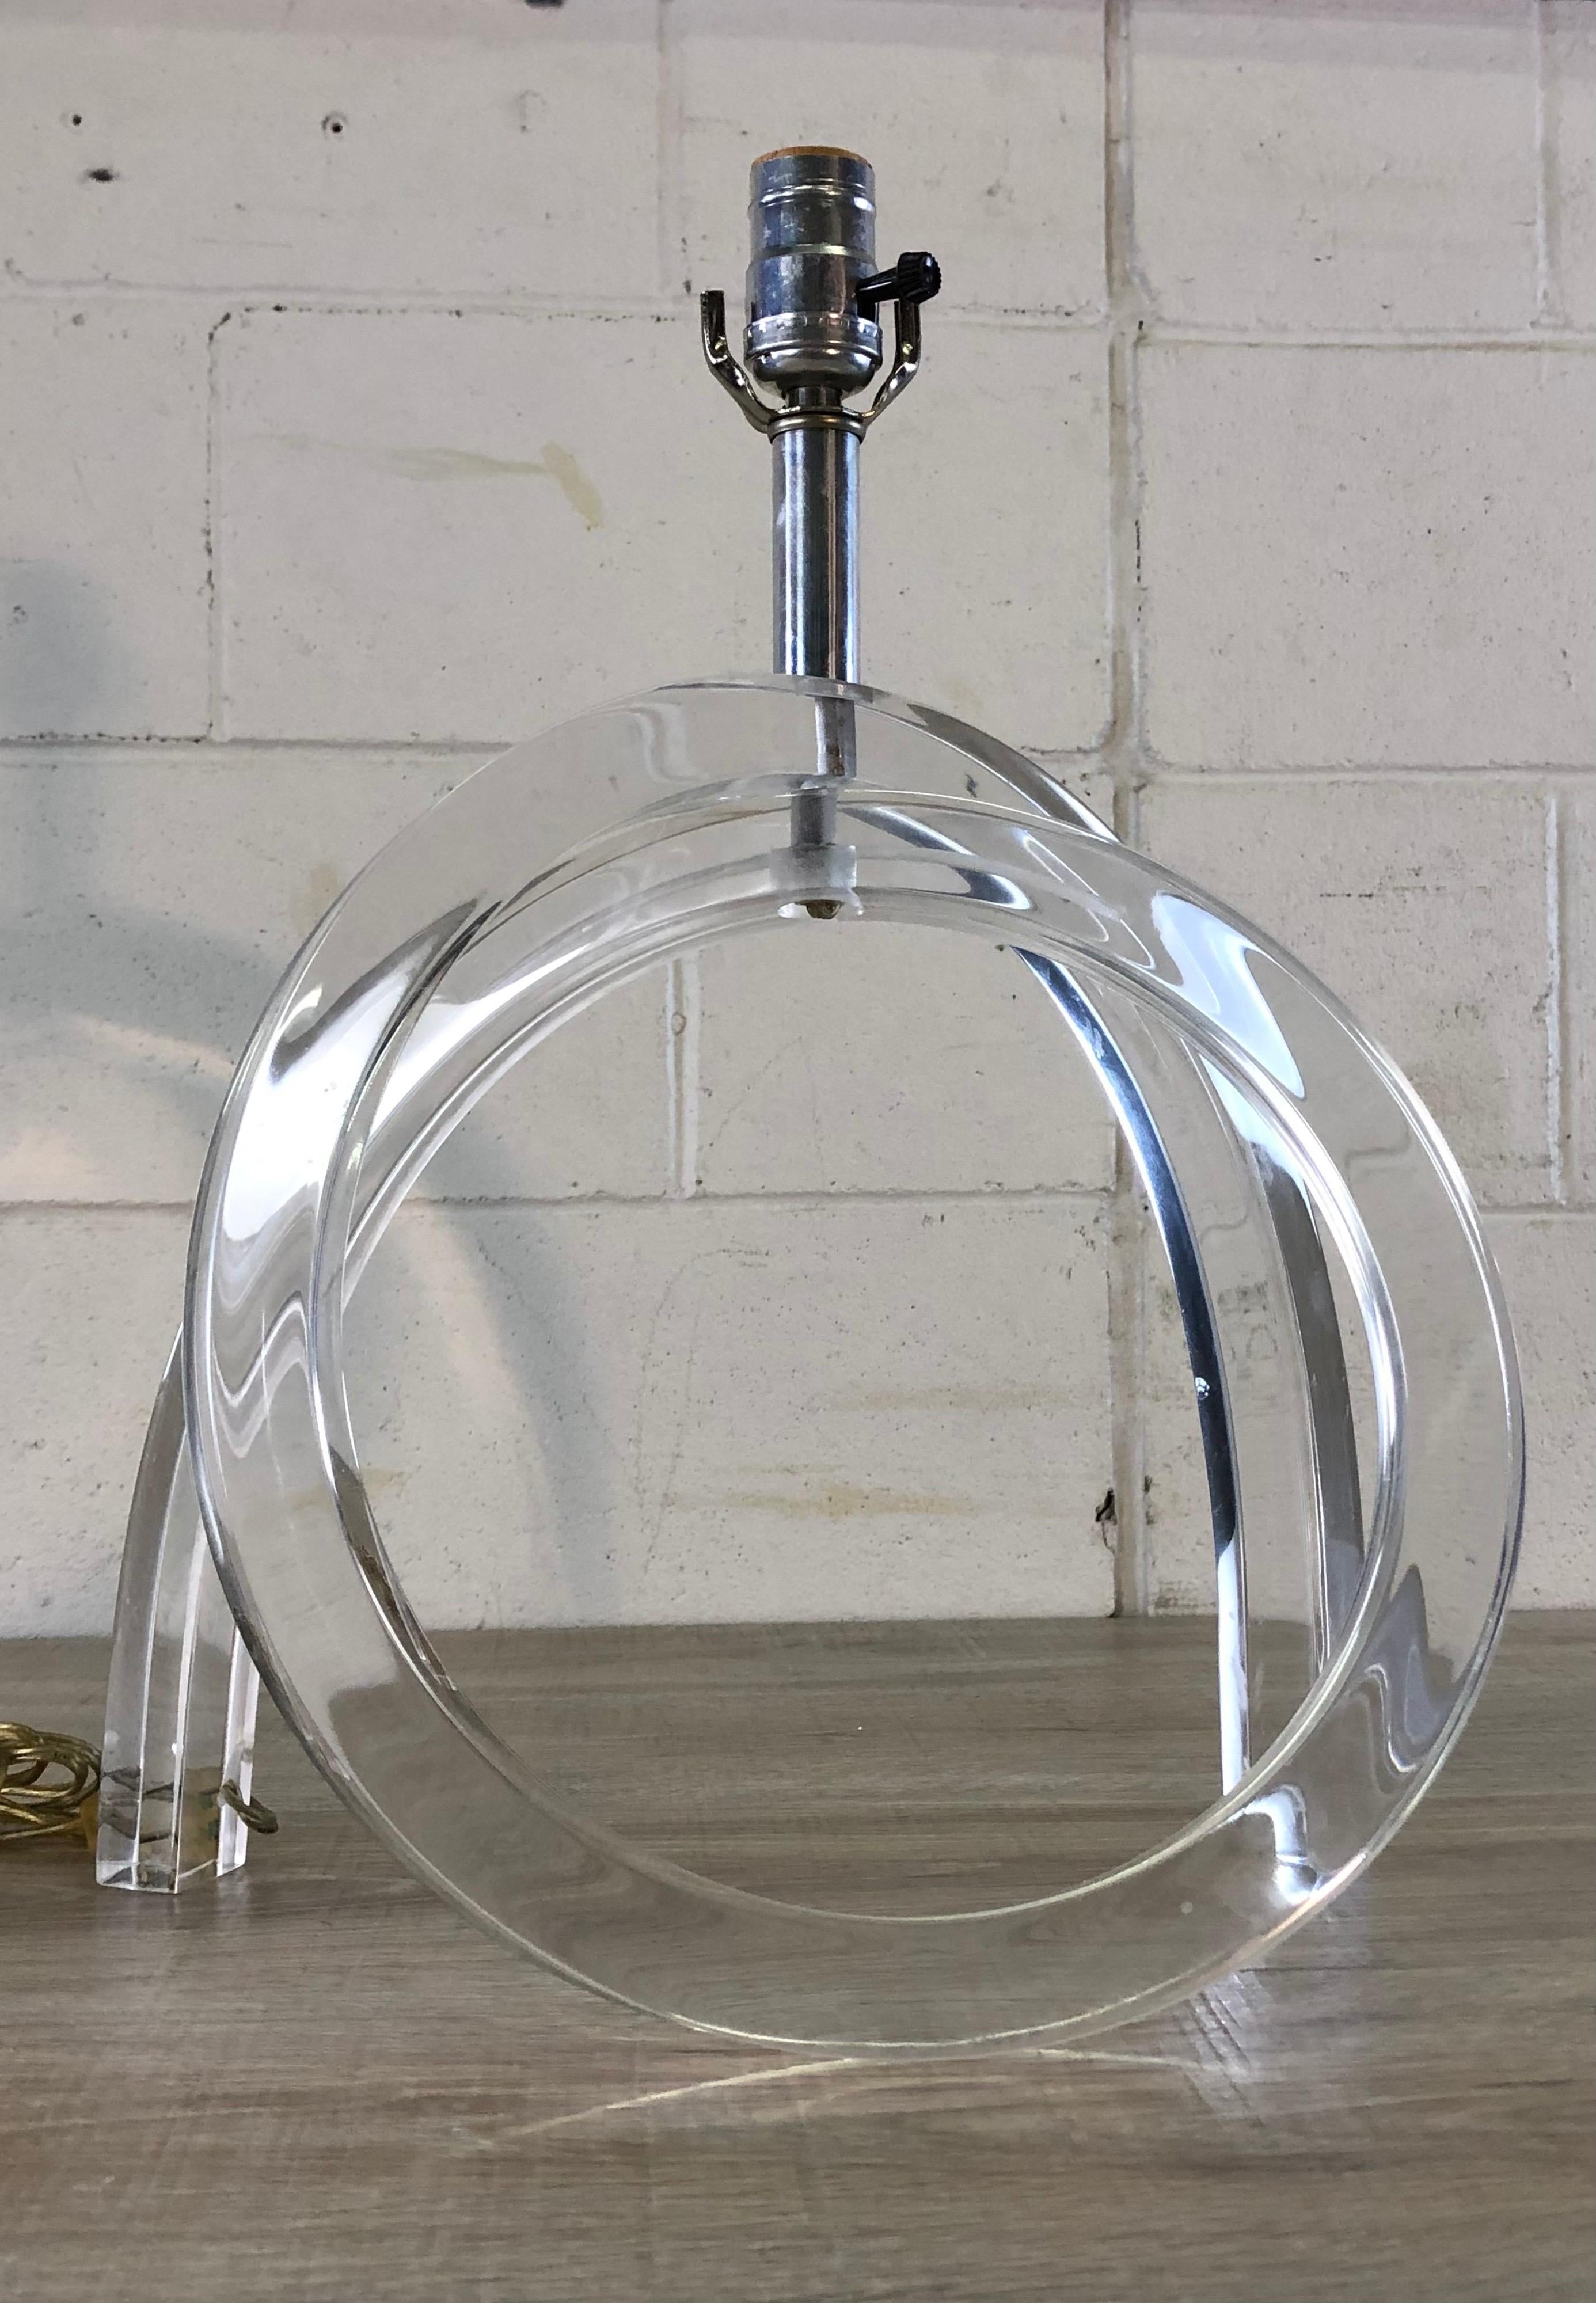 Vintage 1970s lucite “Pretzel” table lamp designed by Herb Ritts for Astrolite of Los Angeles California. Excellent used condition, no harp is included. This lamp is often attributed to Dorothy Thorpe but is designed by Herb Ritts. No marks.